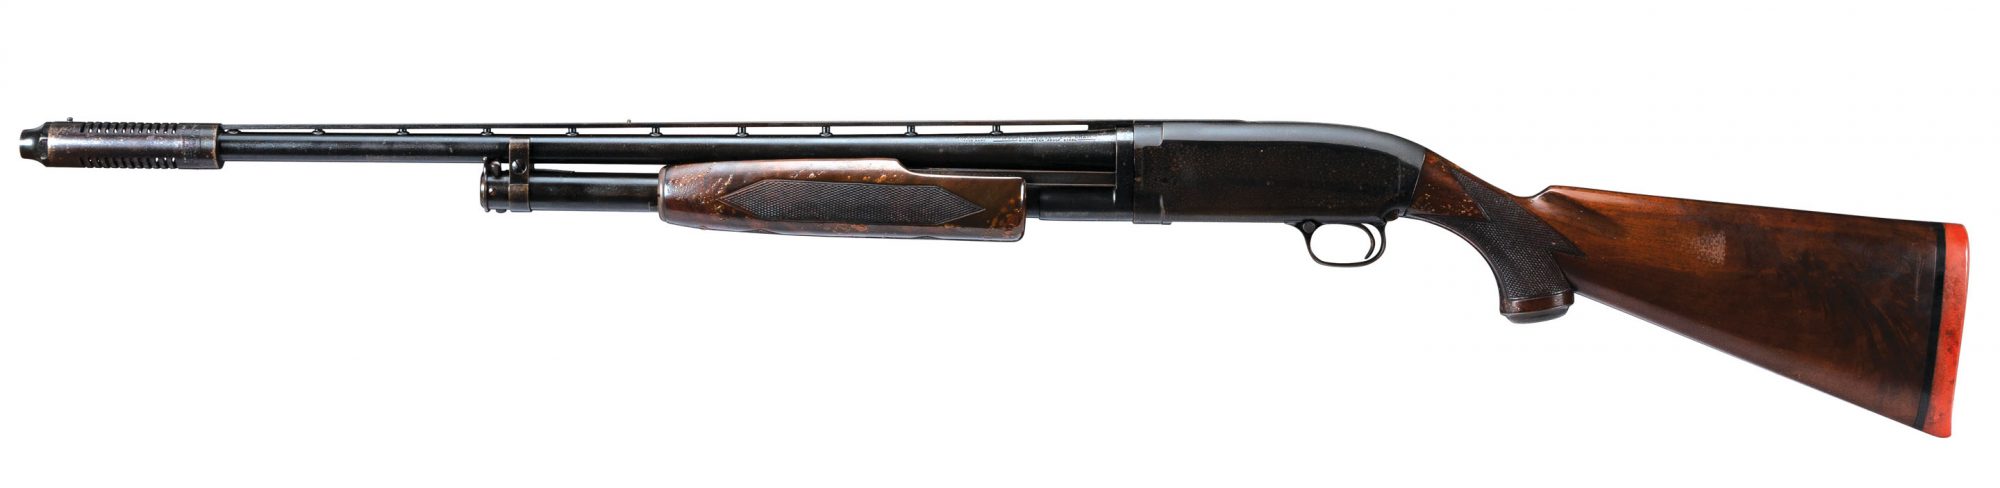 Photo of a Winchester Model 12 from 1958 before restoration work by Turnbull Restoration of Bloomfield, NY